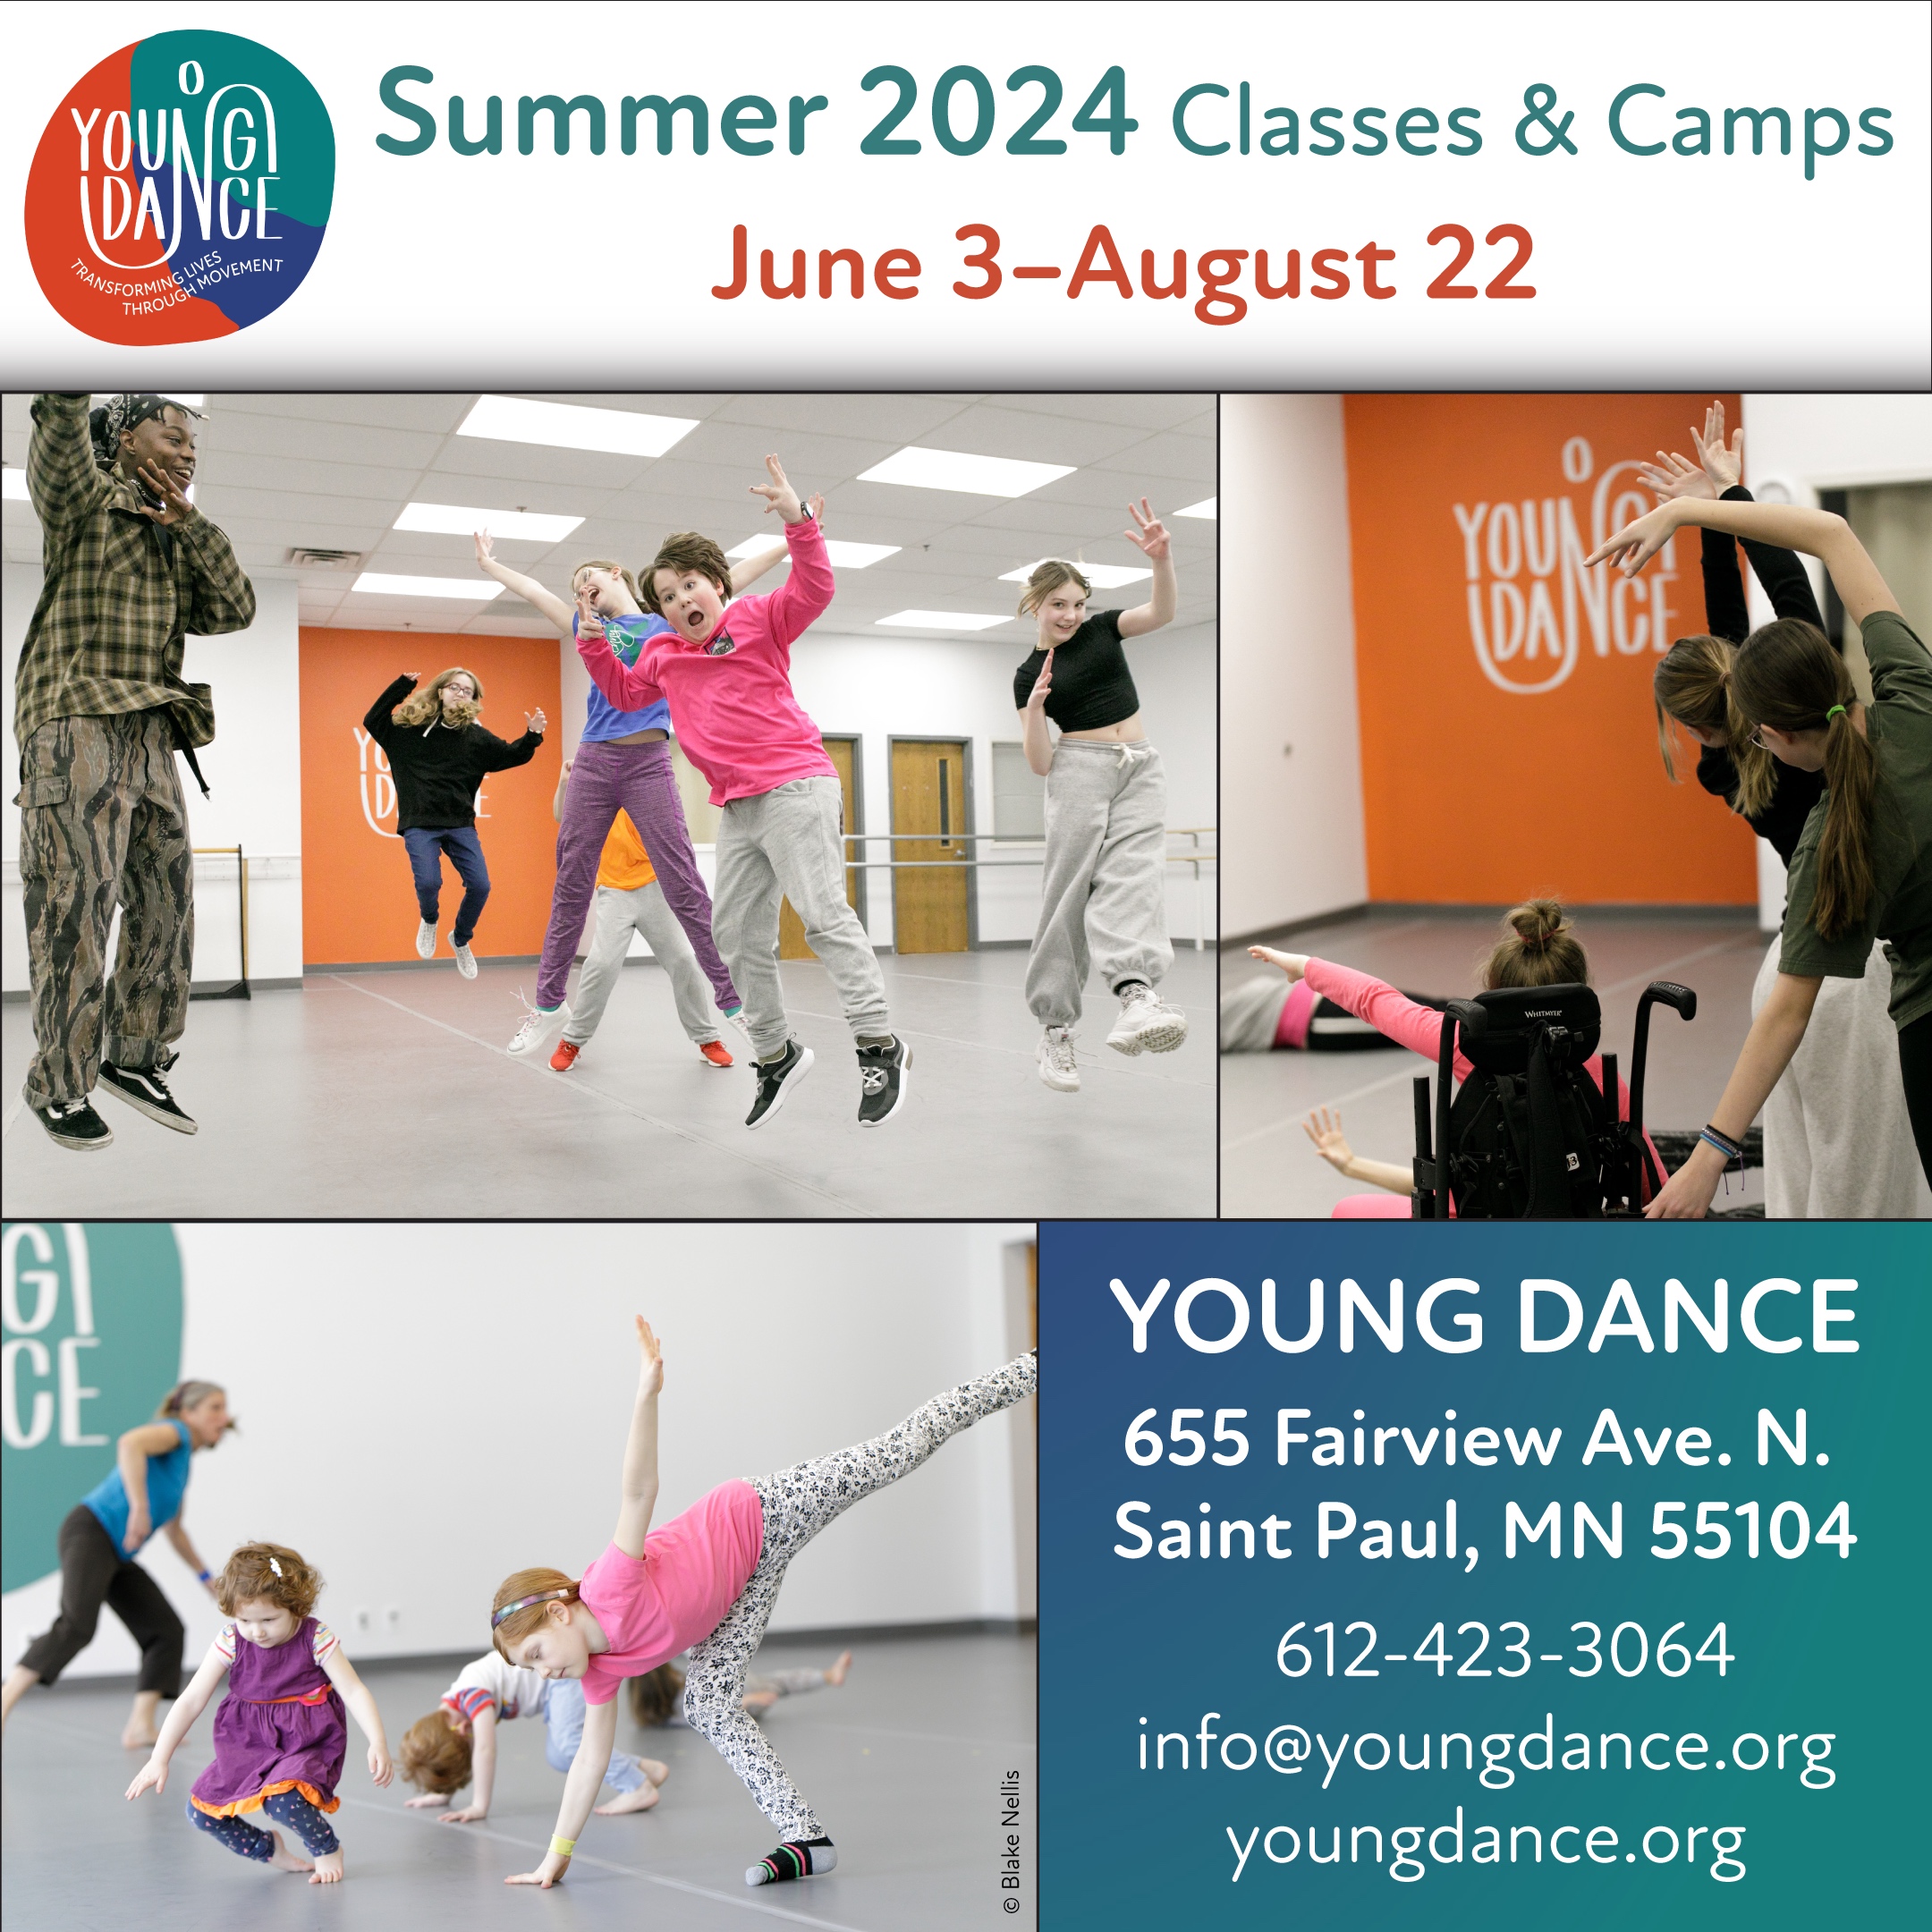 Three Young Dance class images by photographer Blake Nellis with text, “Summer 2024 Camps and Classes June 3–August 22."